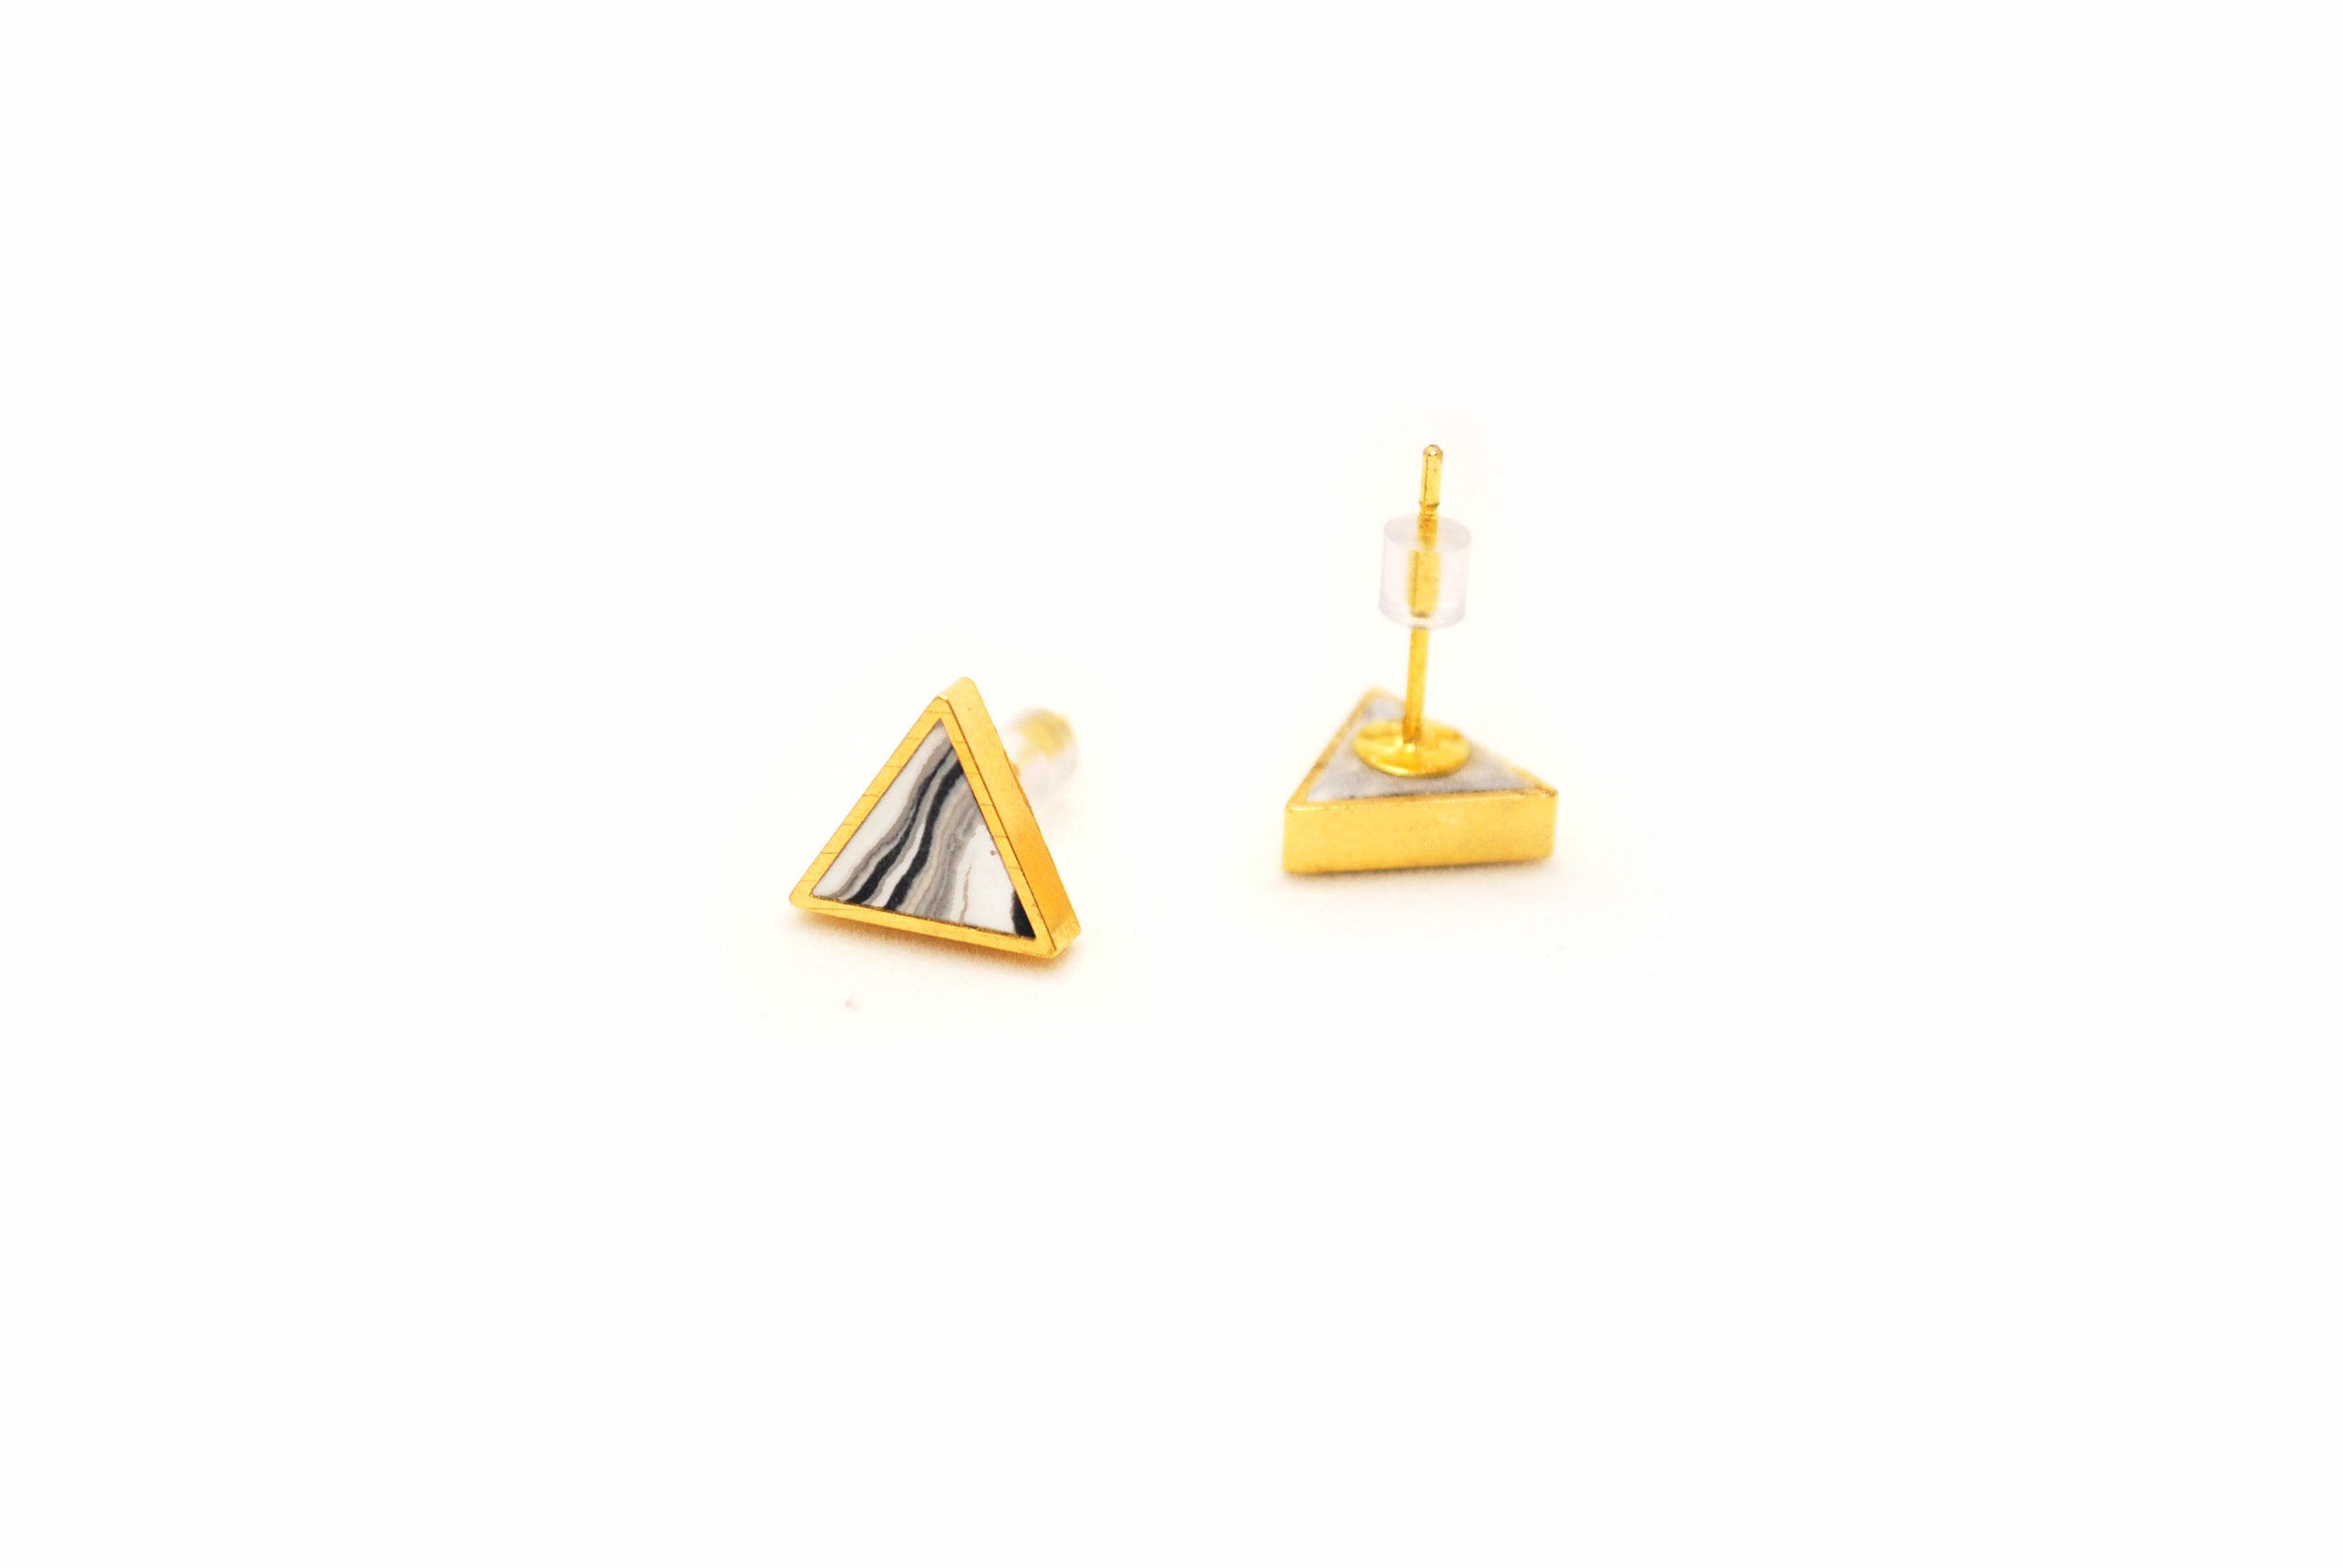 Black and White Striped Clay Triangles Earring Set